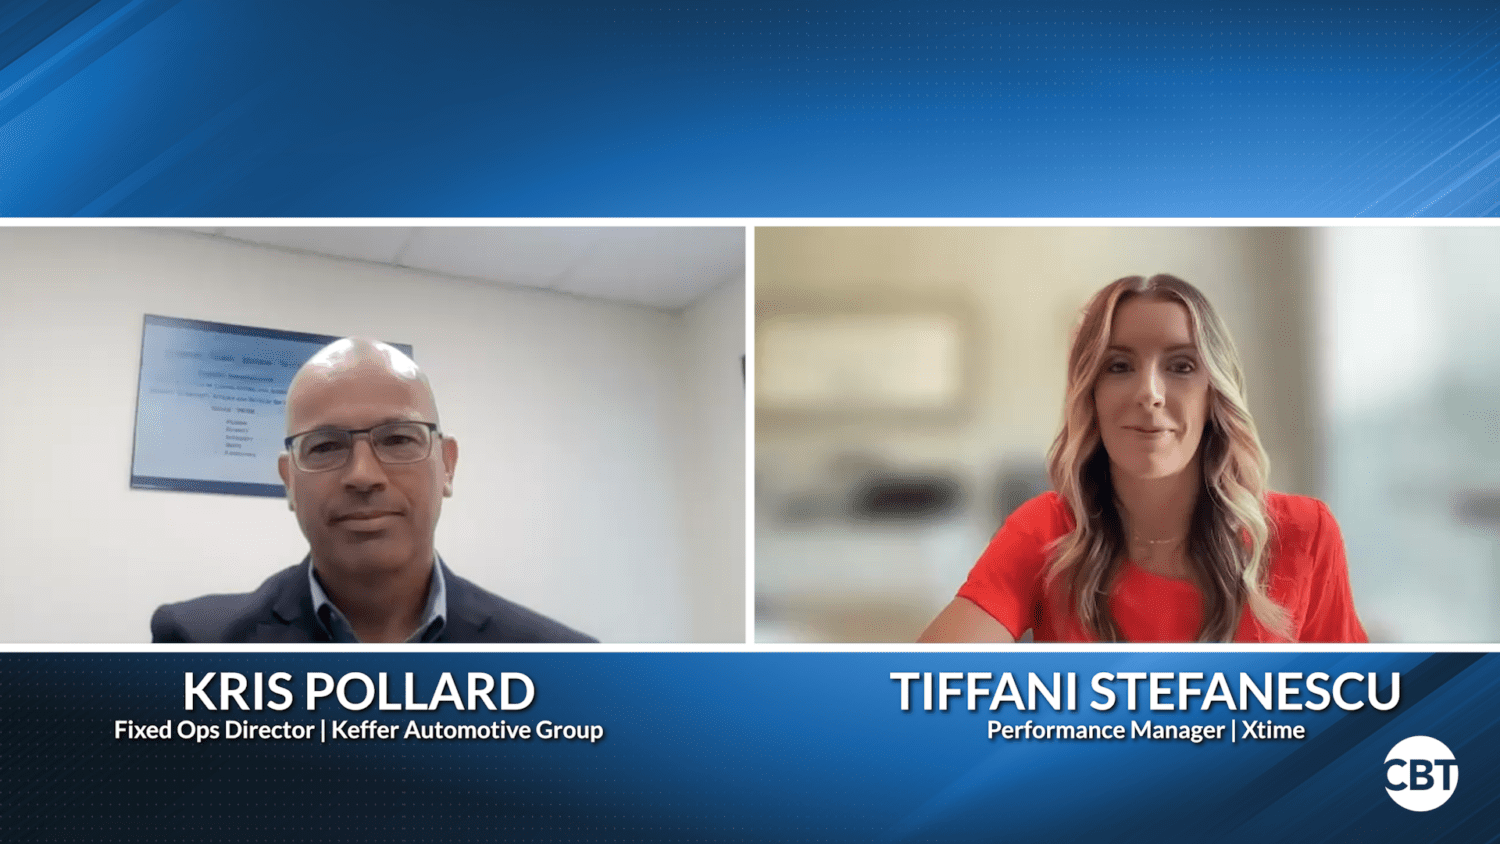 On this episode of Dealer Forward, host Tiffani Stefanescu is joined by Kris Pollard to discuss new service department technologies.